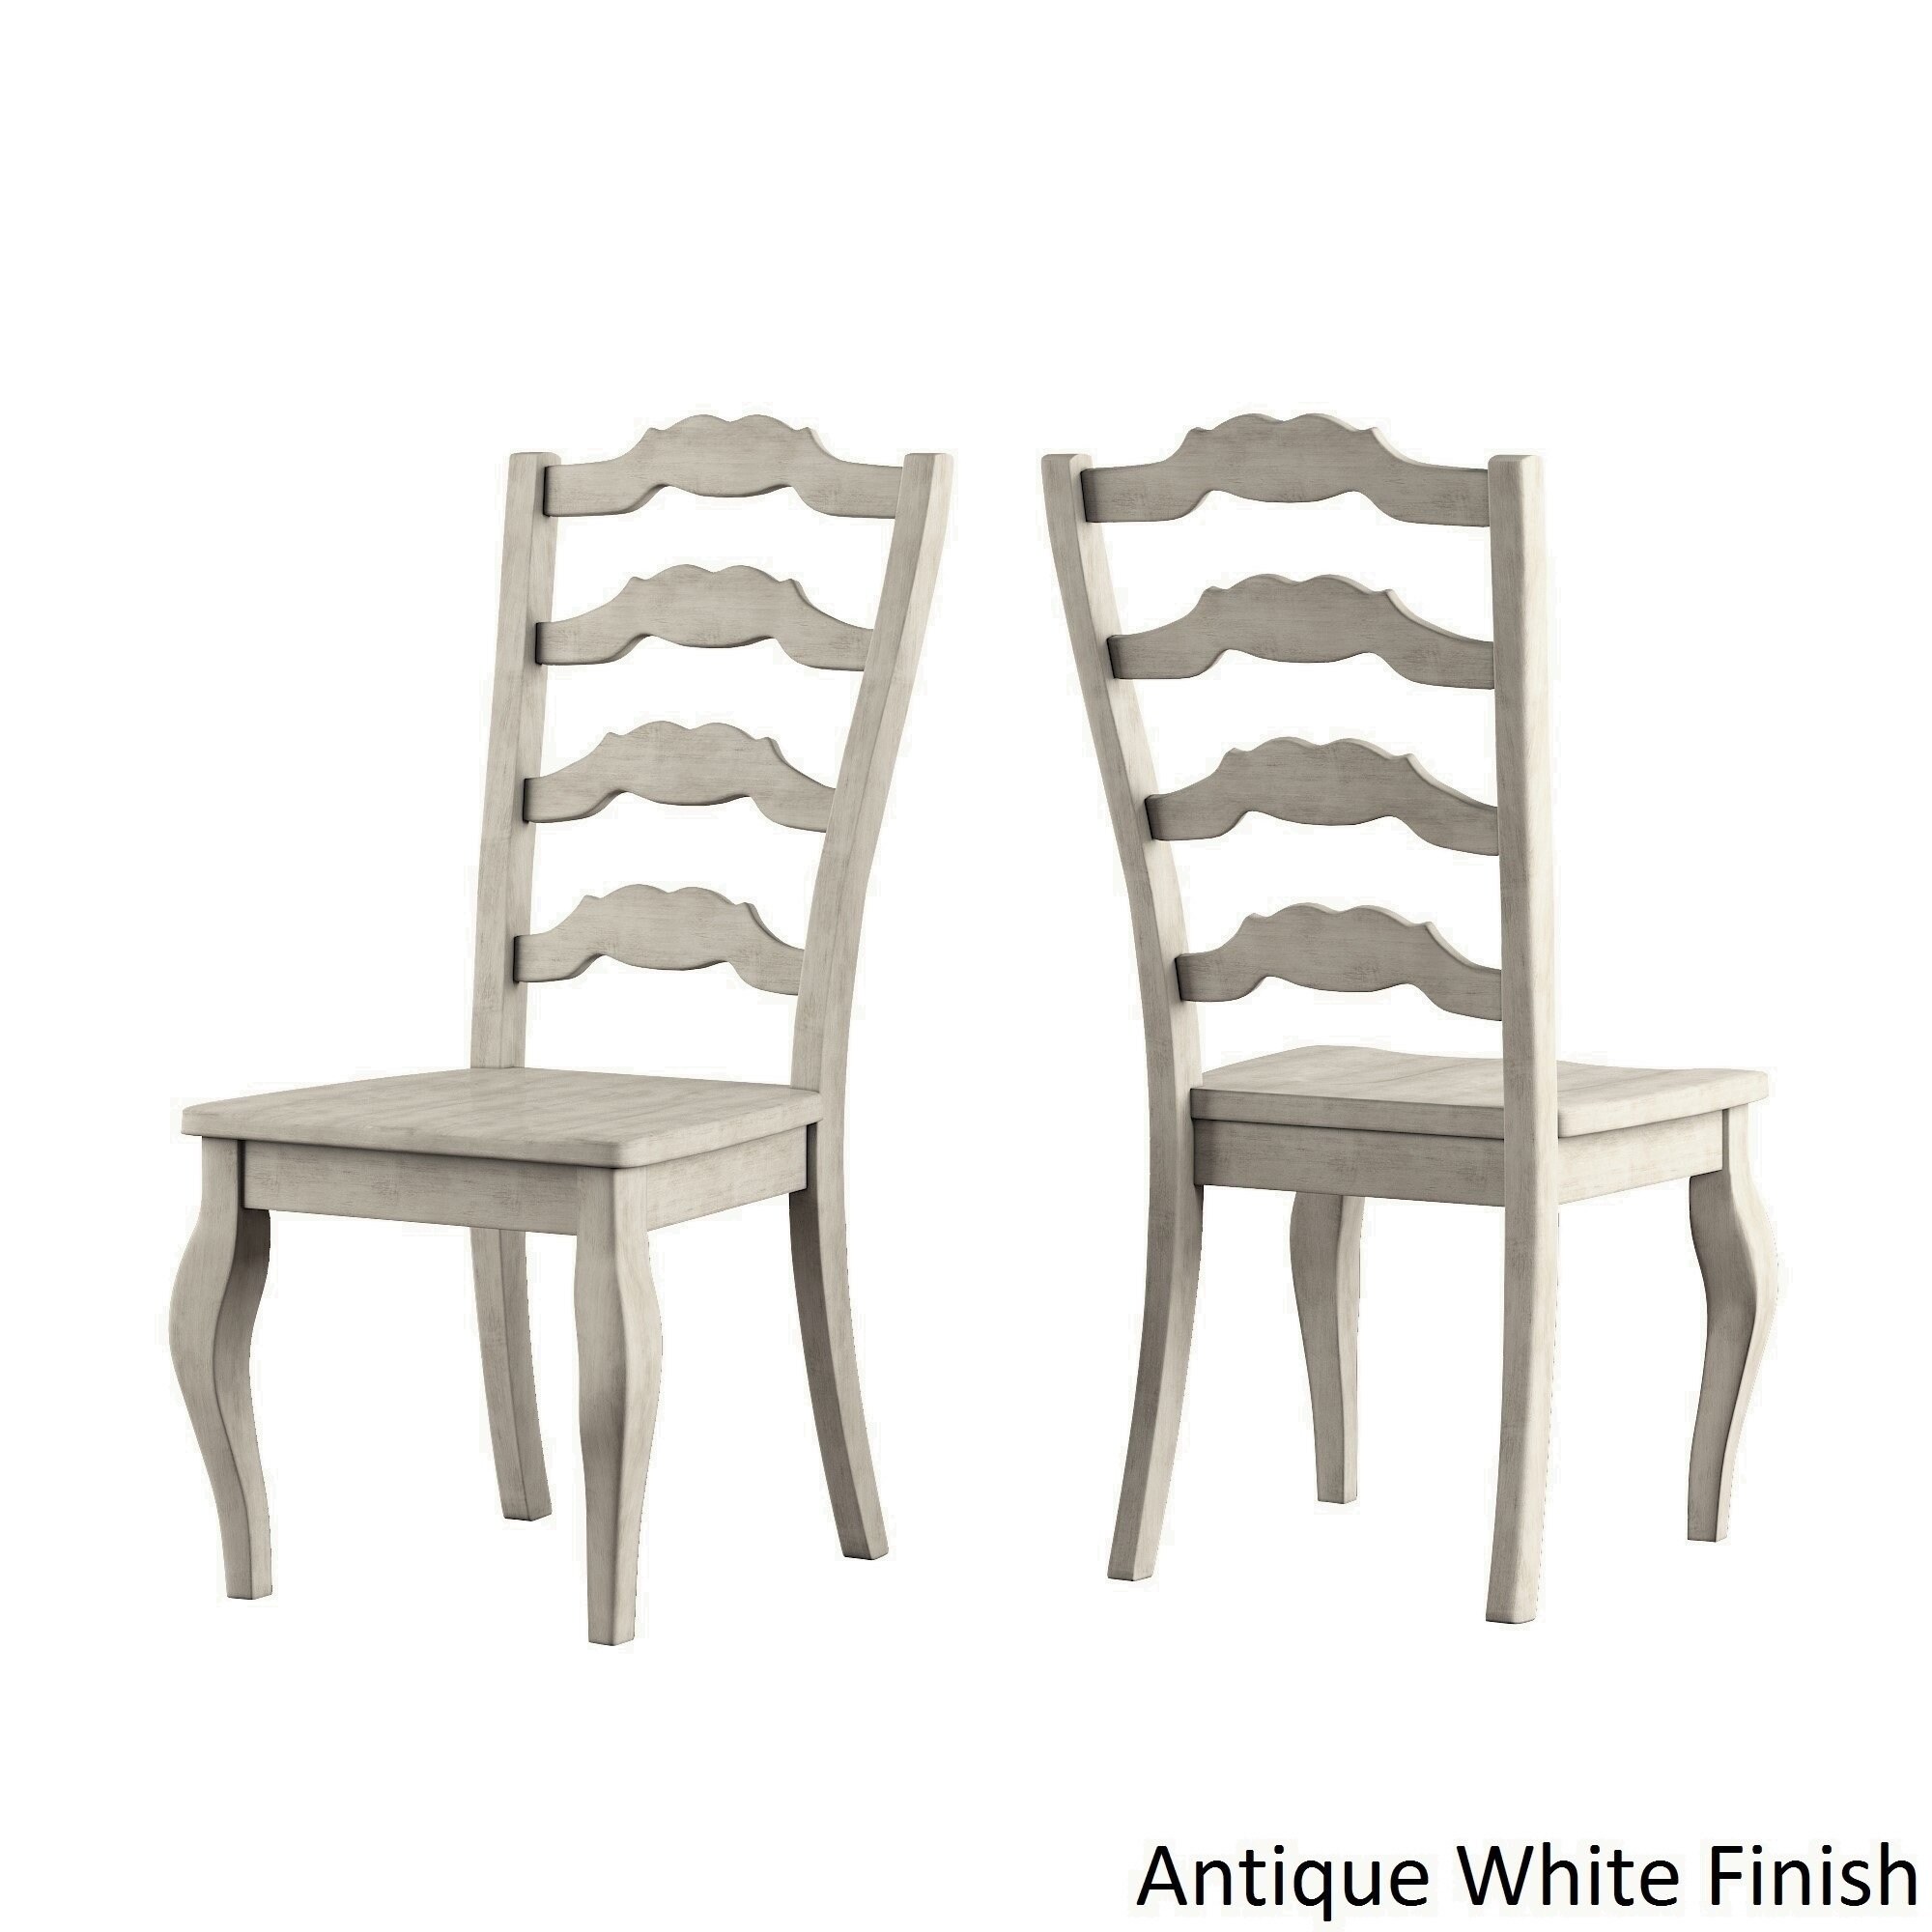 Eleanor Sage Green Farmhouse Trestle Base French Ladder 6-piece Dining Set by iNSPIRE Q Classic